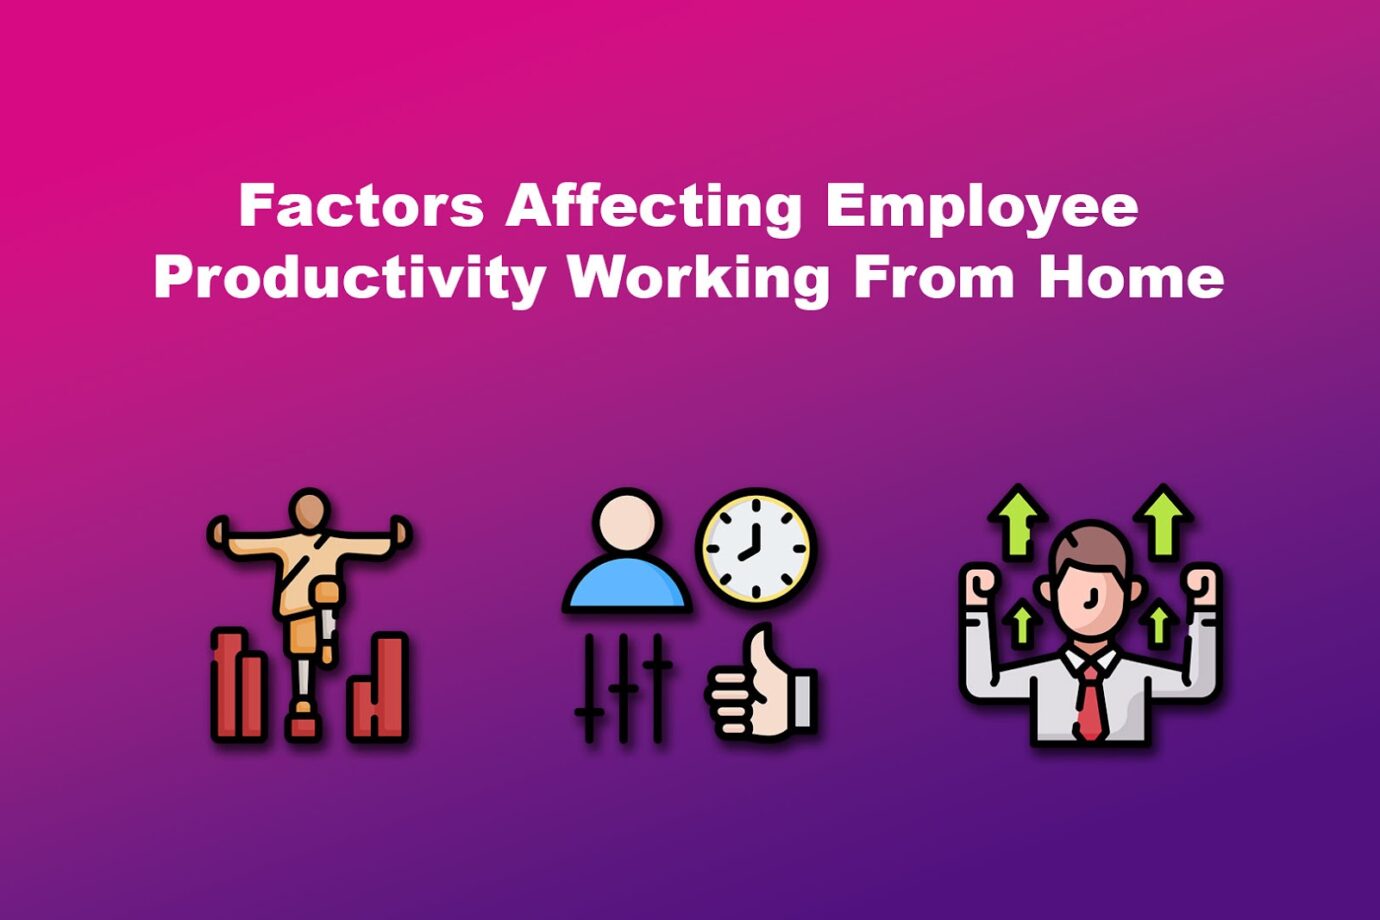 Factors Affecting Employee Productivity Working From Home